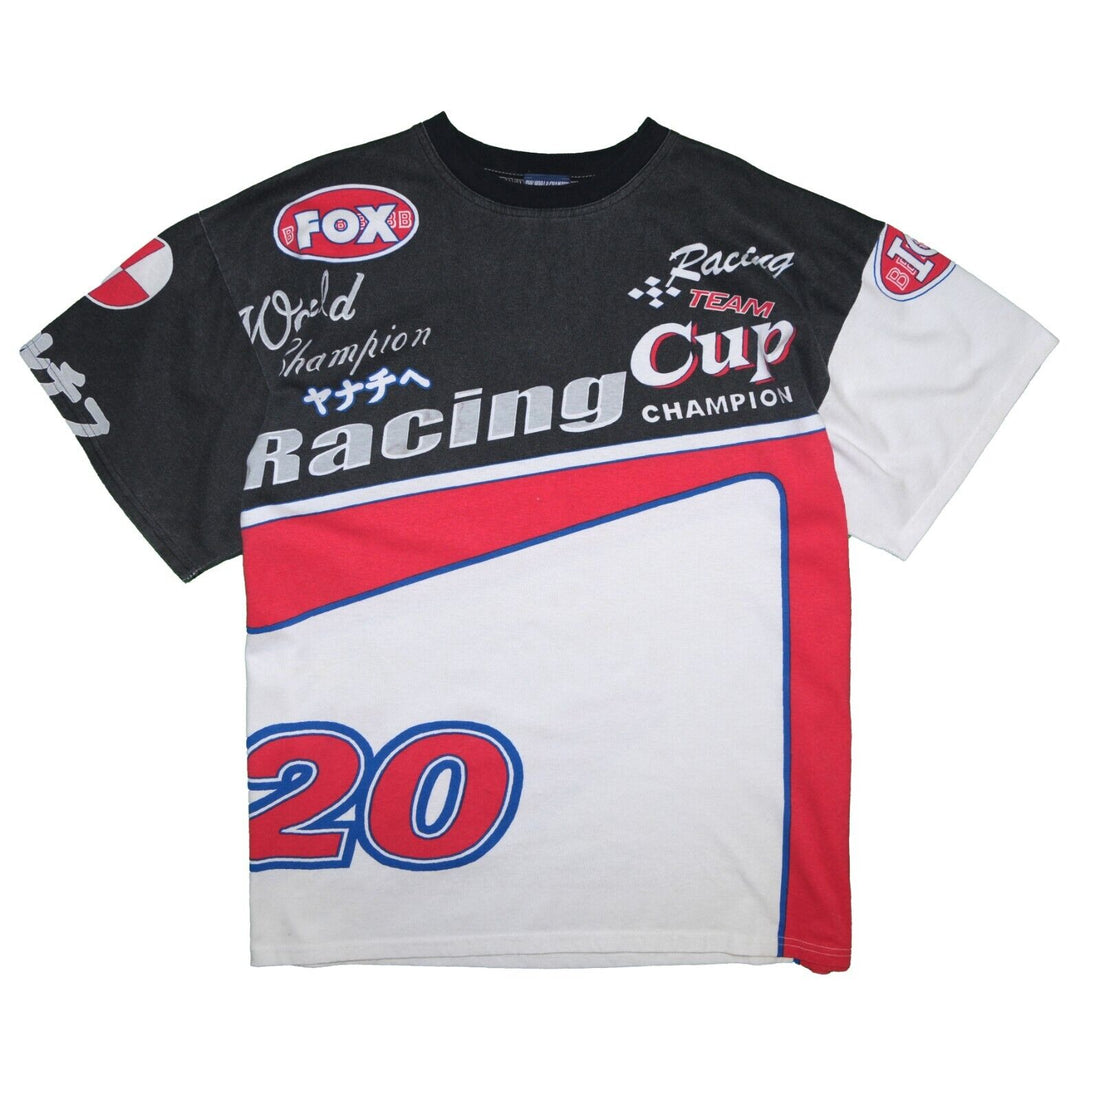 Vintage Fox Racing Cup The World Championship T-Shirt XL Black All Over 90s